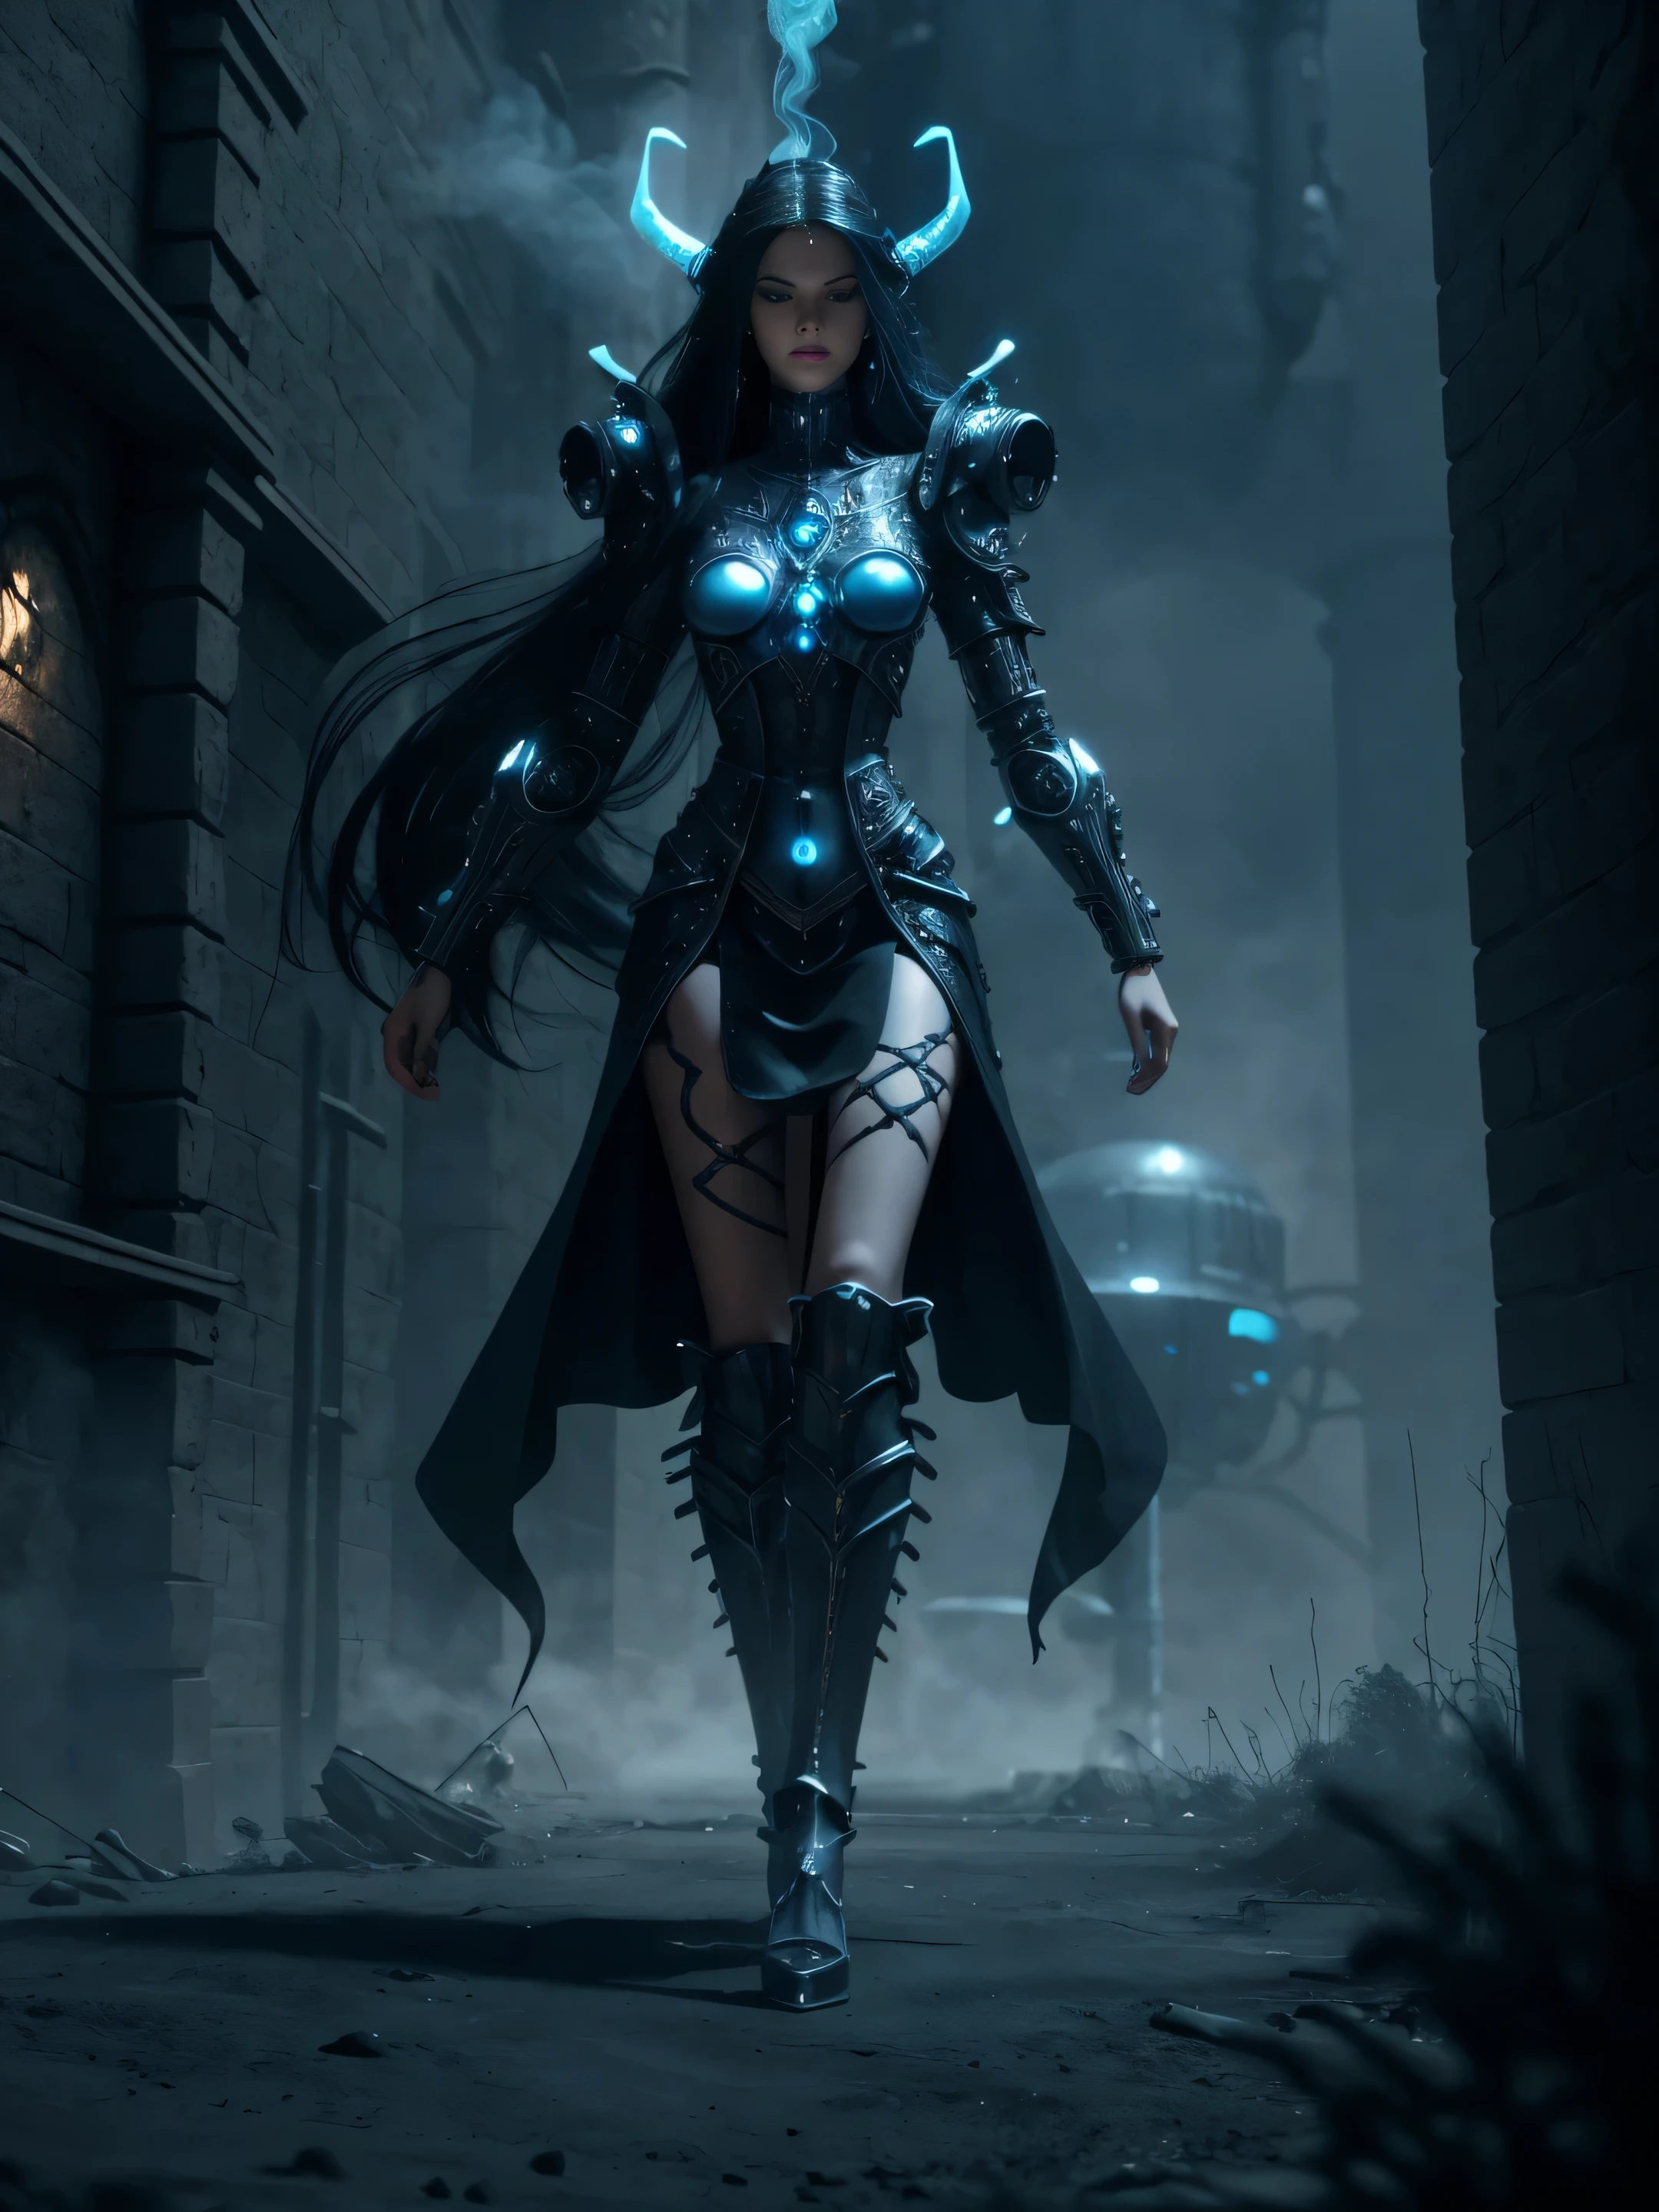 full body fantasy image medieval viking goddess controlling a complicated extraterrestrial alien machine long black hair blue eyes white skin tall graceful long legs pipes gears smoke steam 3d elaborate apro details twilight foreboding gloomy futuristic